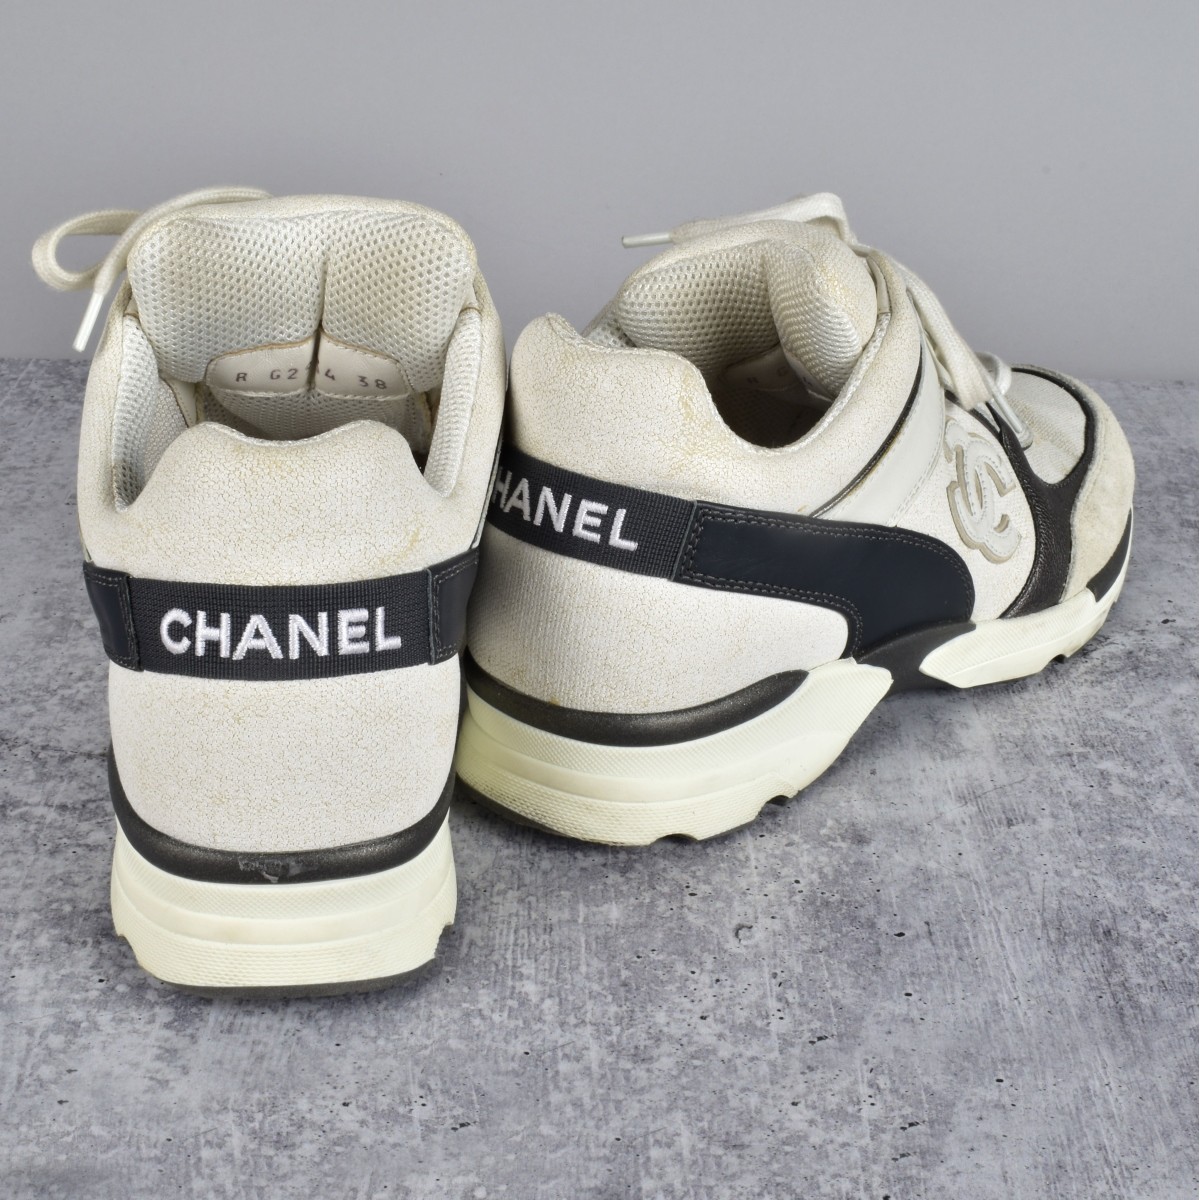 Chanel Sports Shoes | Kodner Auctions